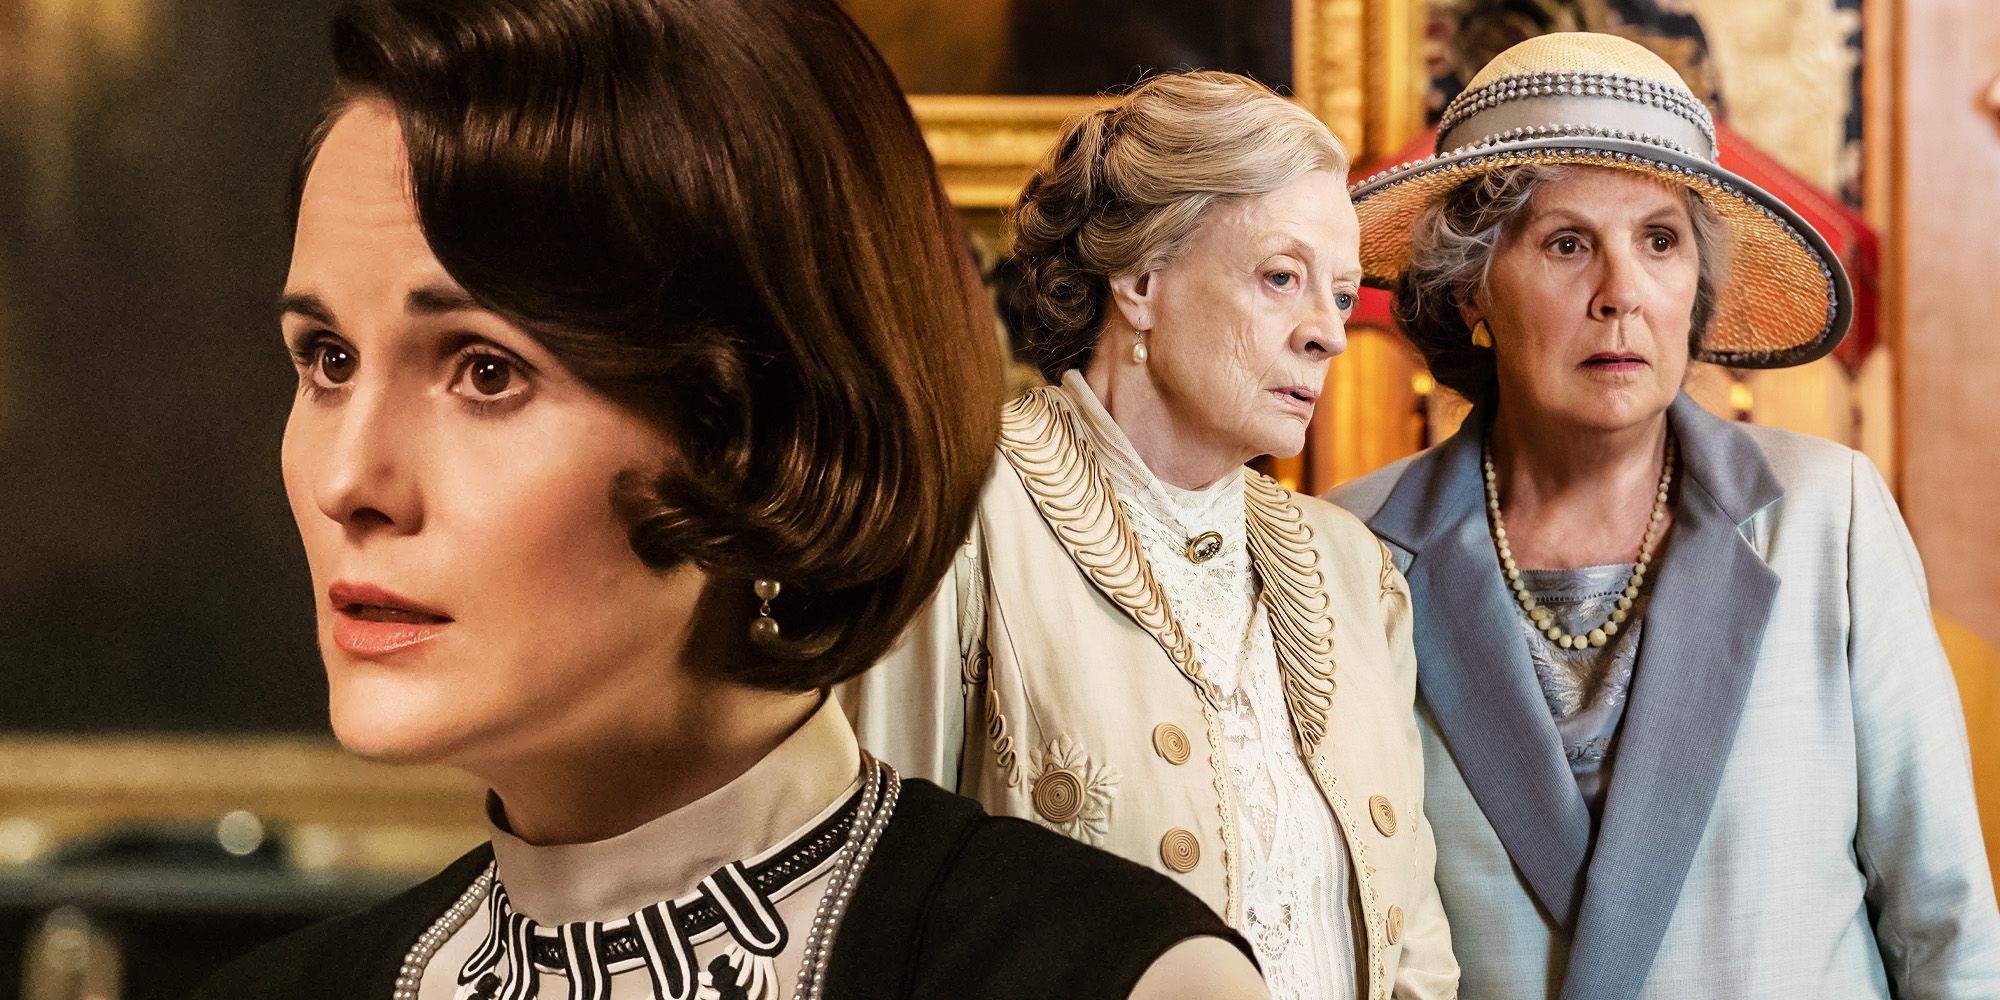 Downton Abbey a new era violet ending was right not lady mary